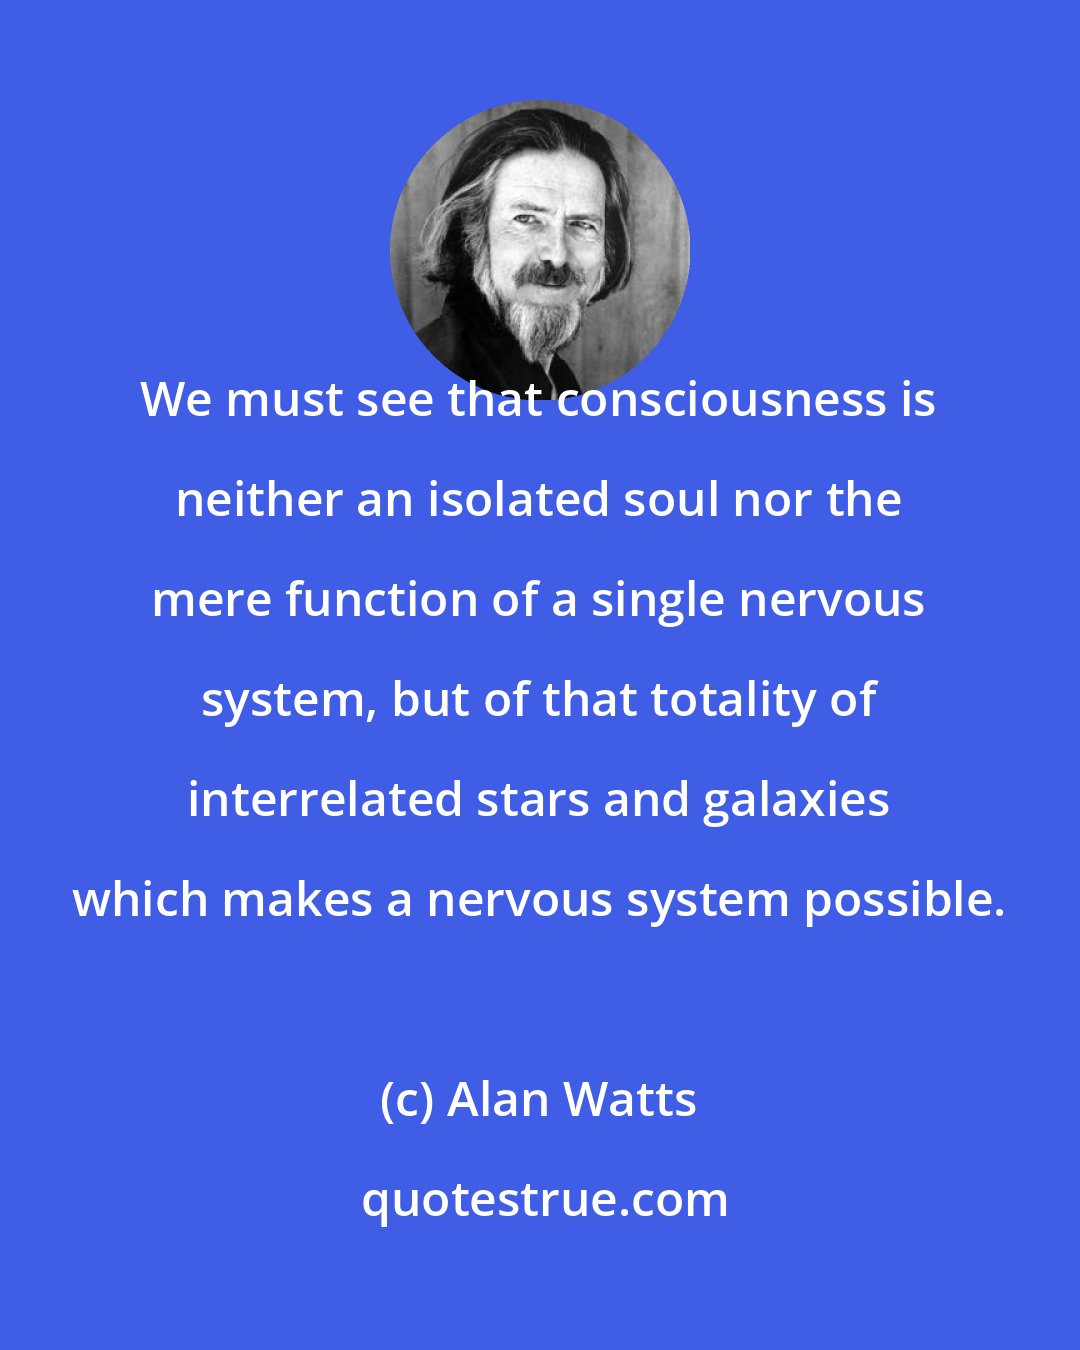 Alan Watts: We must see that consciousness is neither an isolated soul nor the mere function of a single nervous system, but of that totality of interrelated stars and galaxies which makes a nervous system possible.